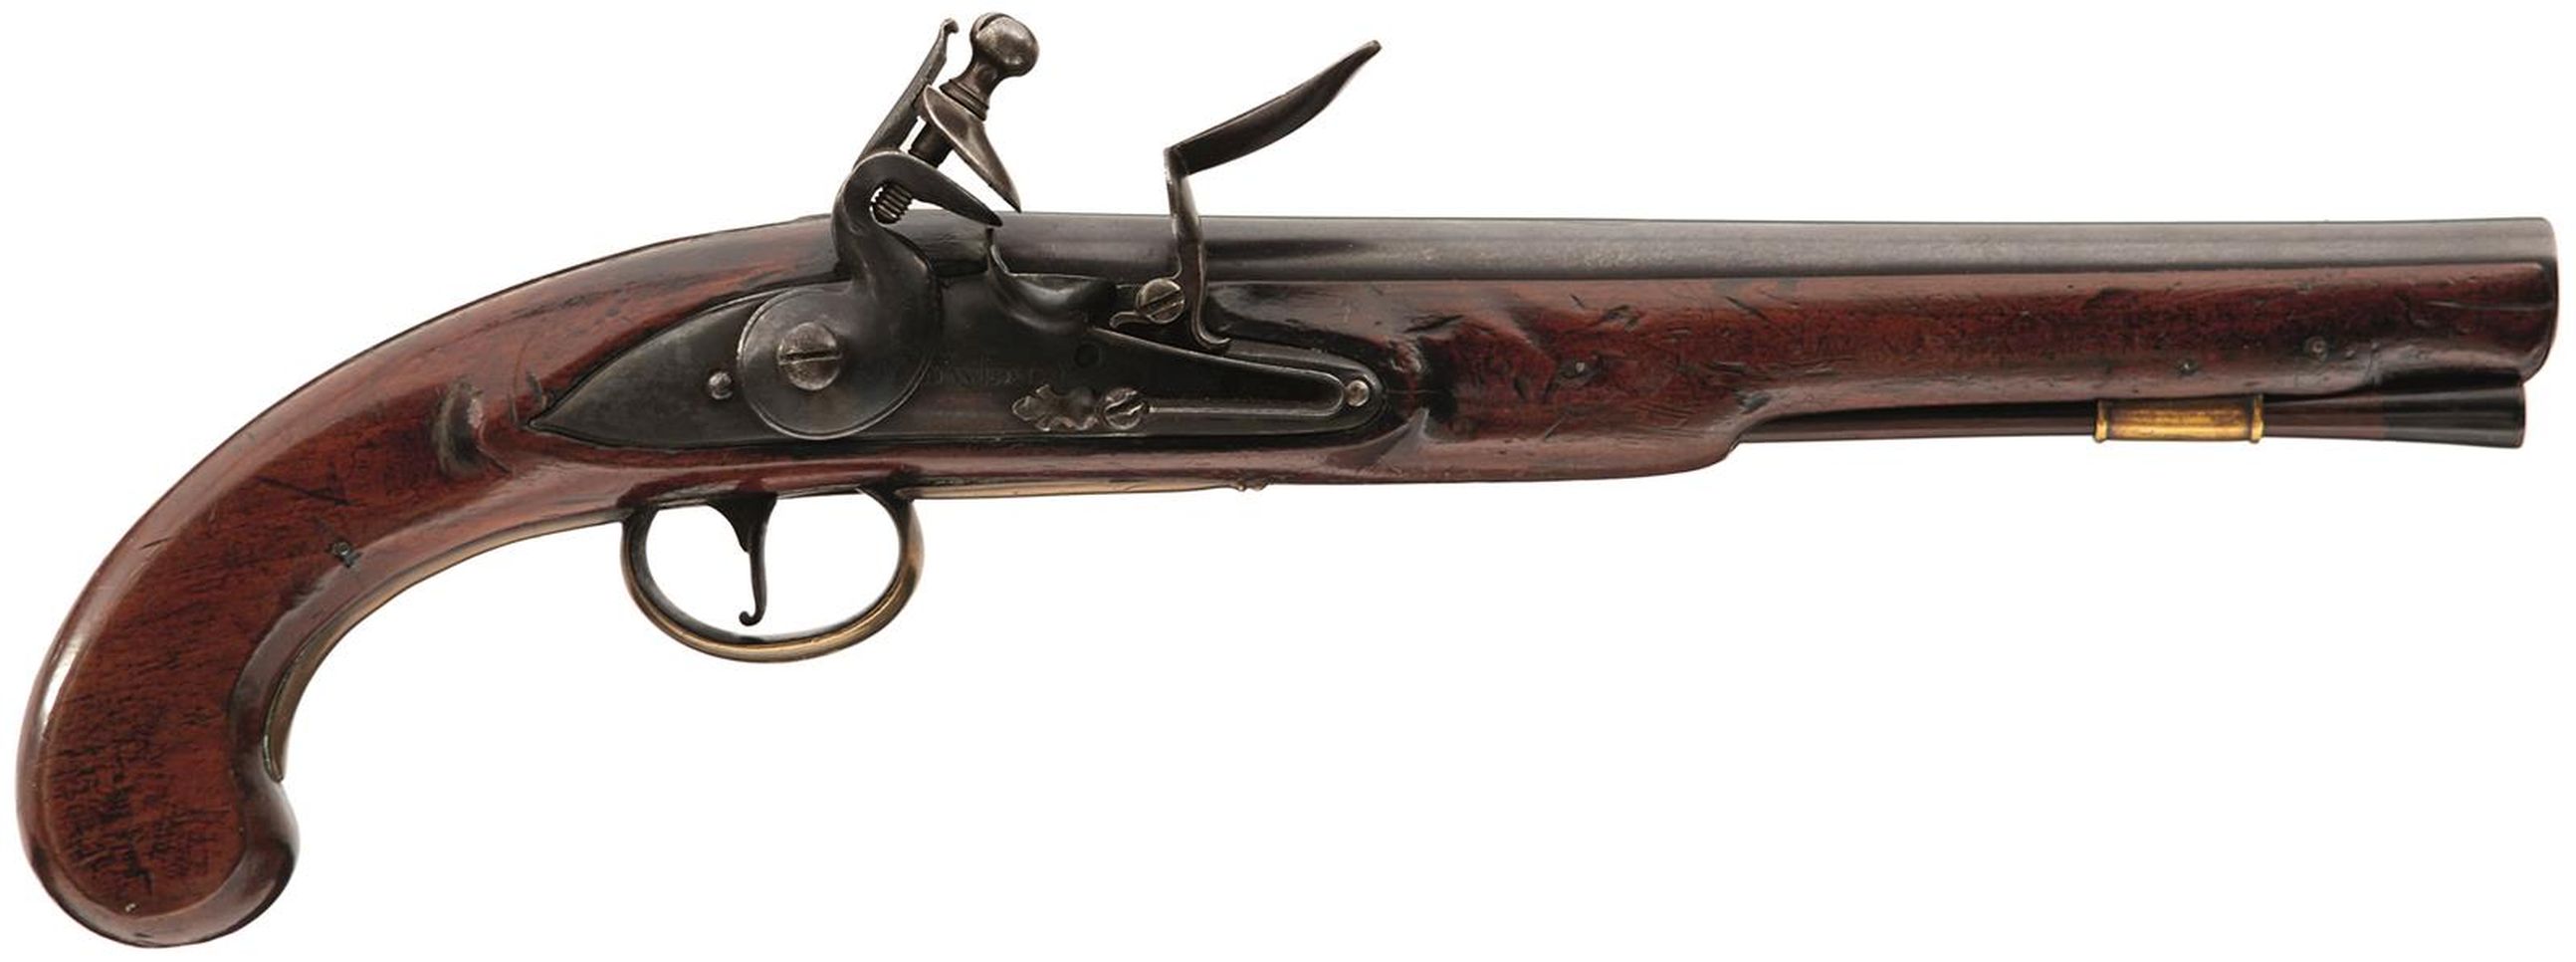 A PAIR OF 20-BORE FLINTLOCK DUELLING OR HOLSTER PISTOLS BY ALEXANDER DAVIDSON LONDON, 8.75inch